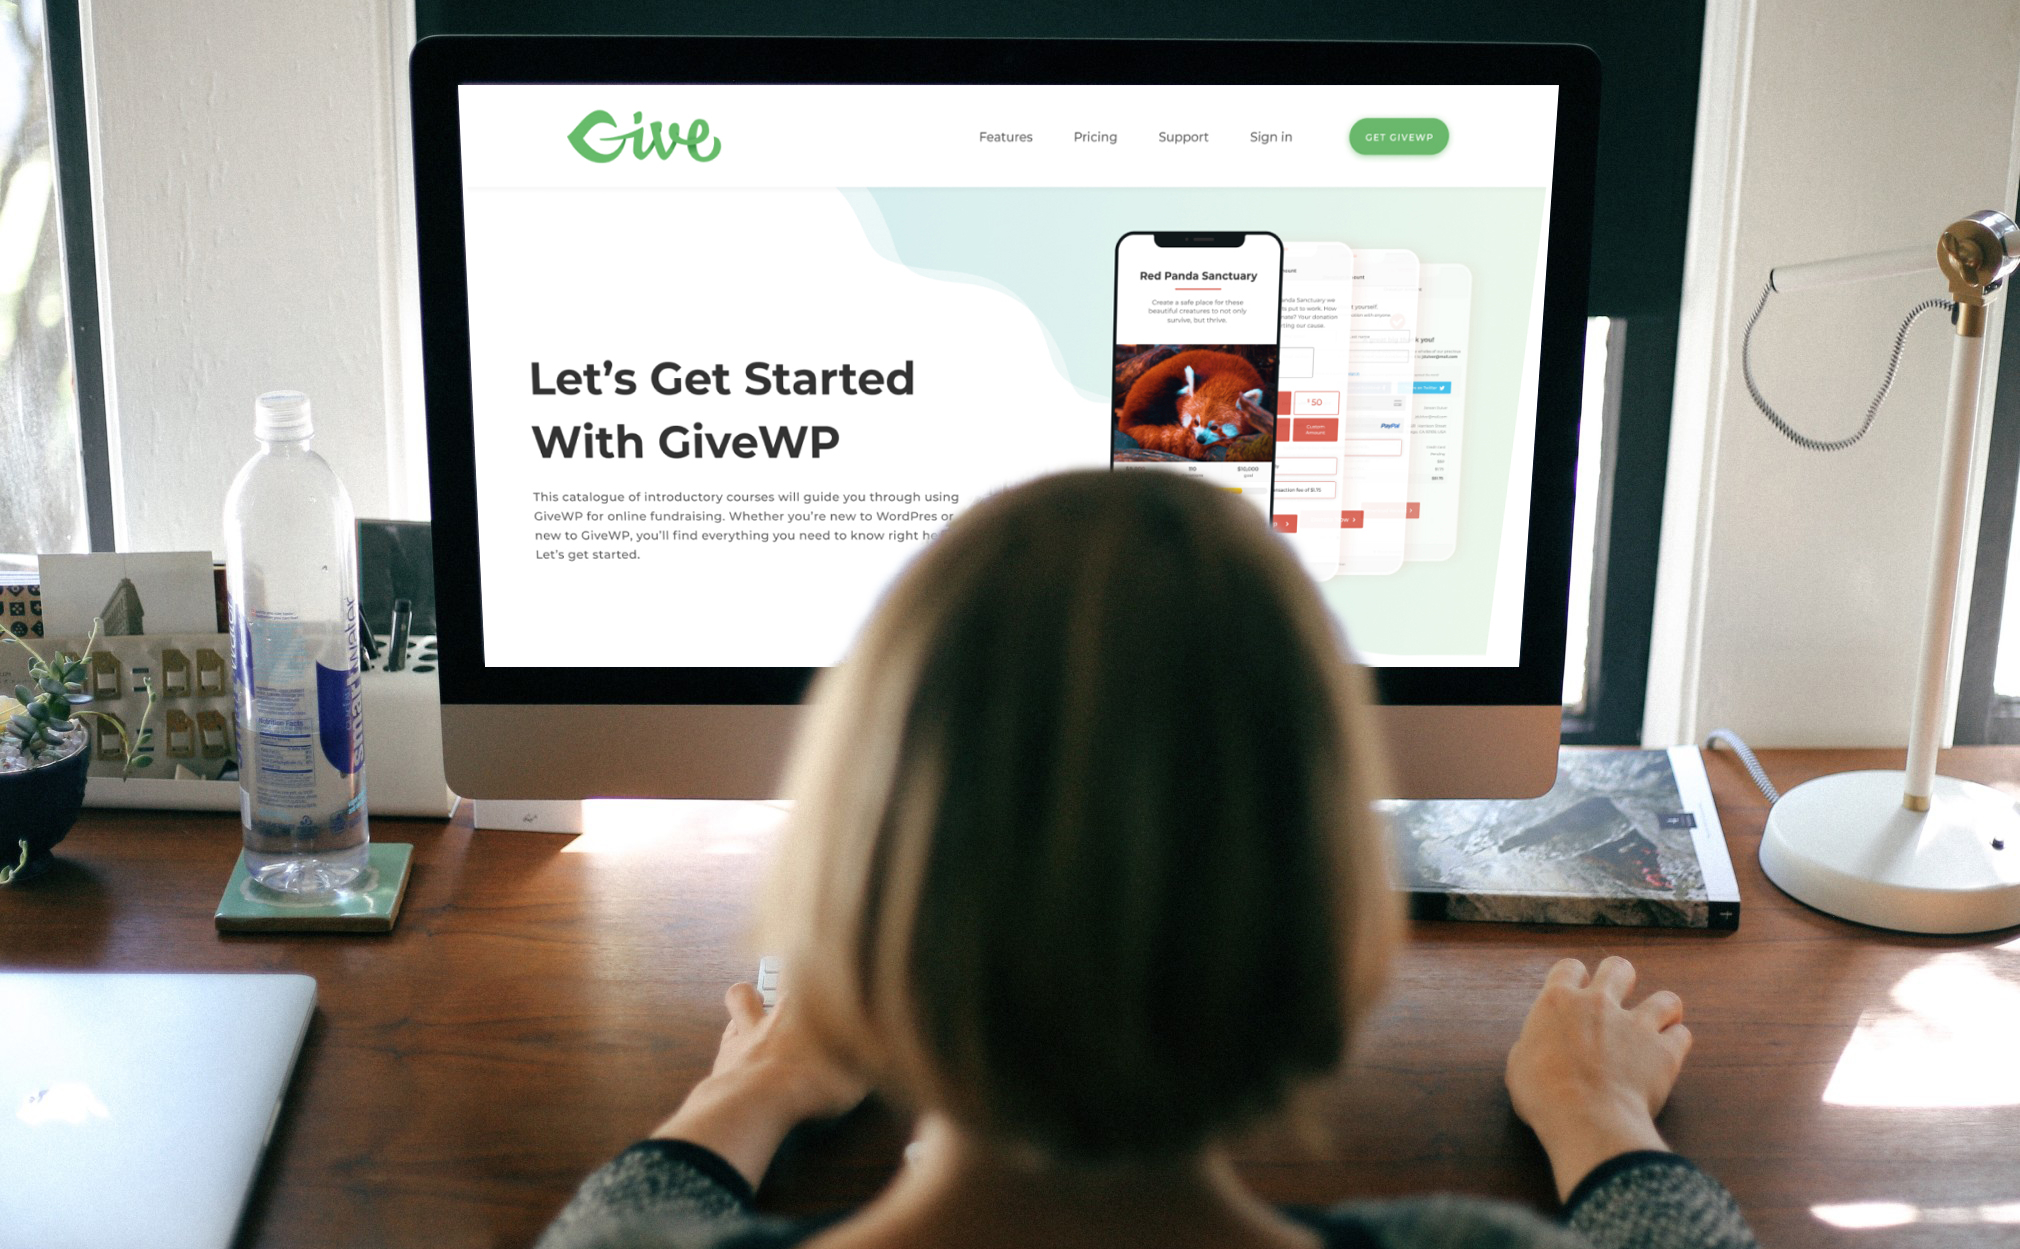 The GiveWP Getting Started Guide will be easy to access for anyone from the GiveWP website.